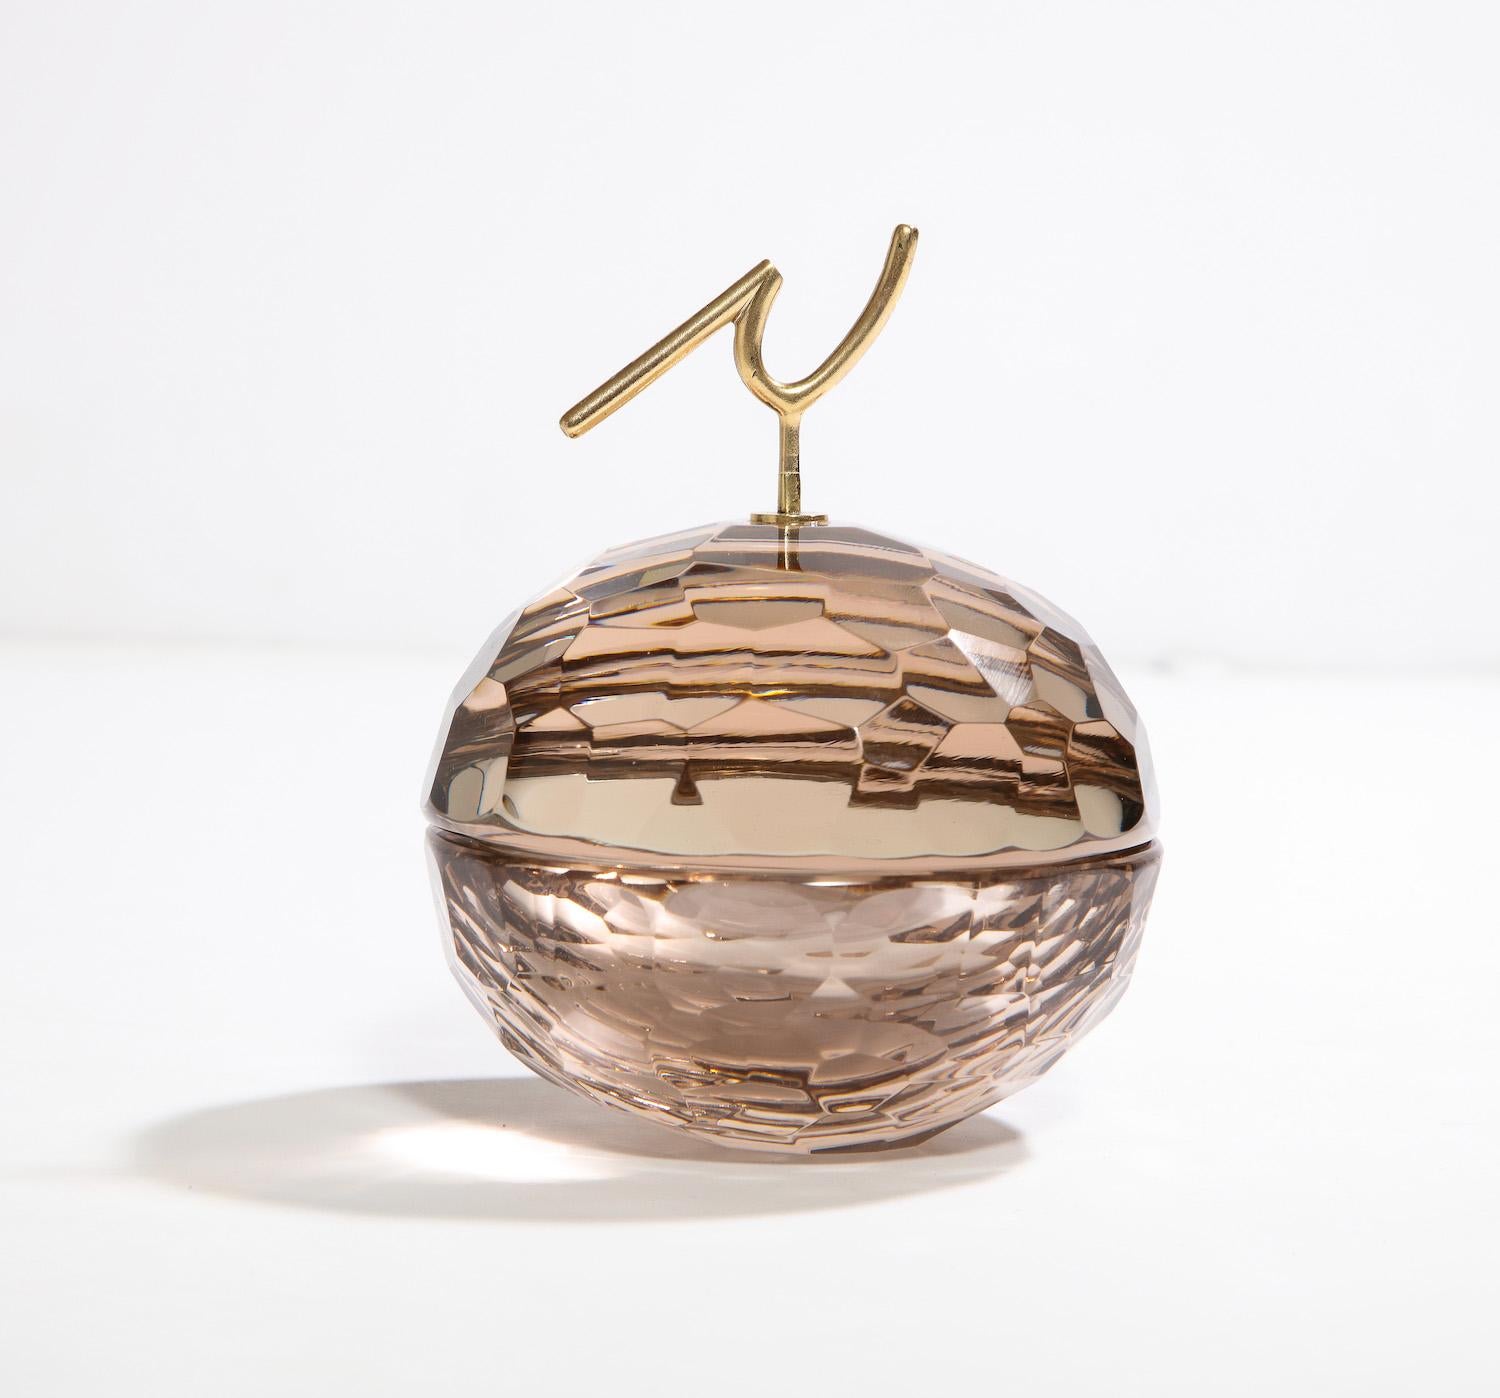 Covered Bowl by Ghiró Studio. Studio-made covered bowl of hand carved glass. Champagne-colored glass featuring faceted exterior and all polished edges. Cast-brass handle and artist signed underneath.